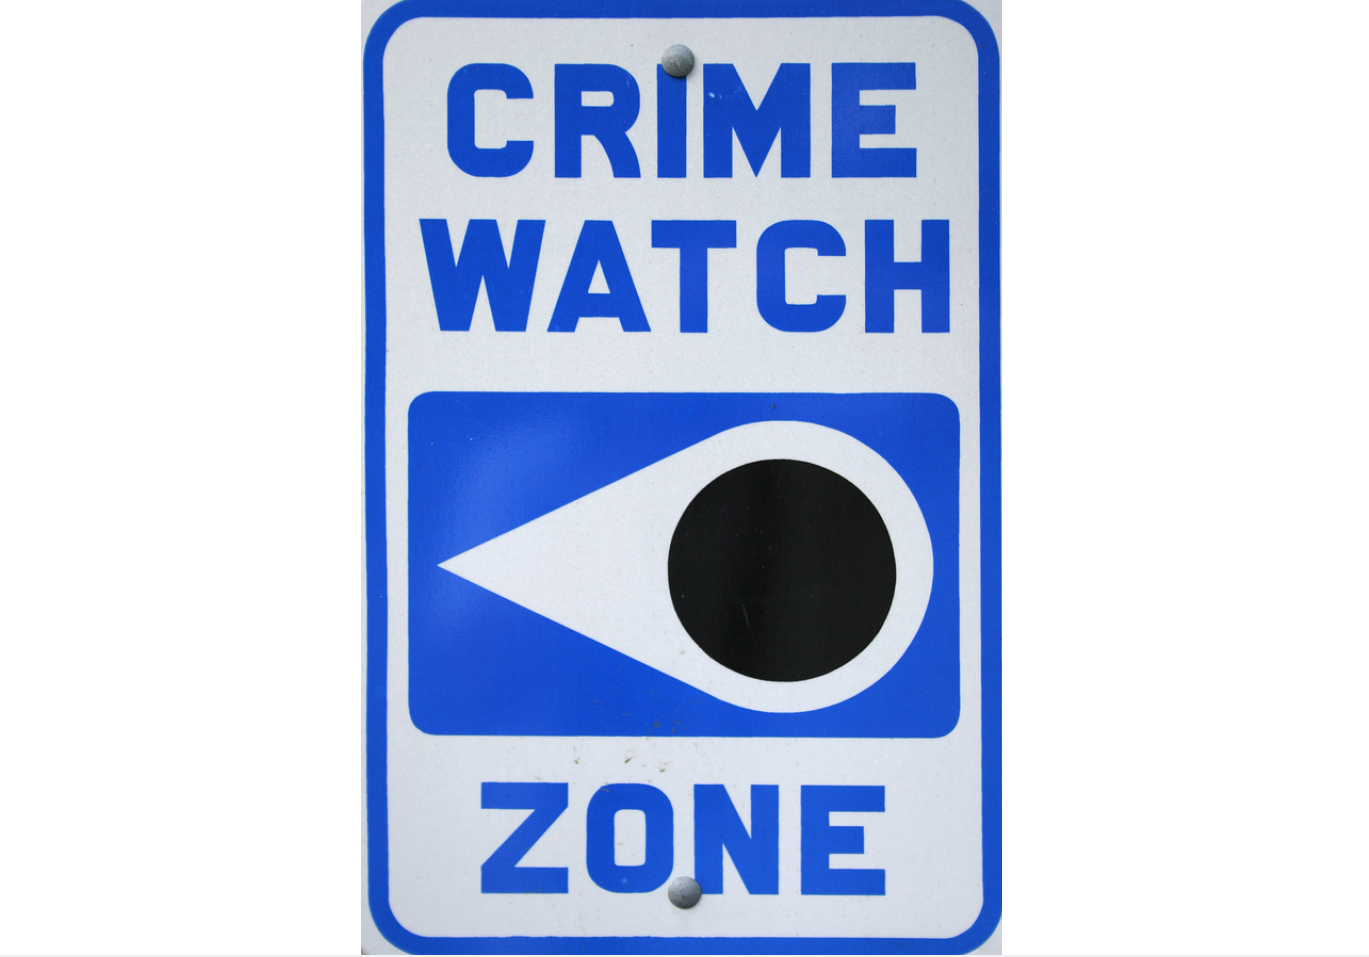 Crime Watch Zone sign